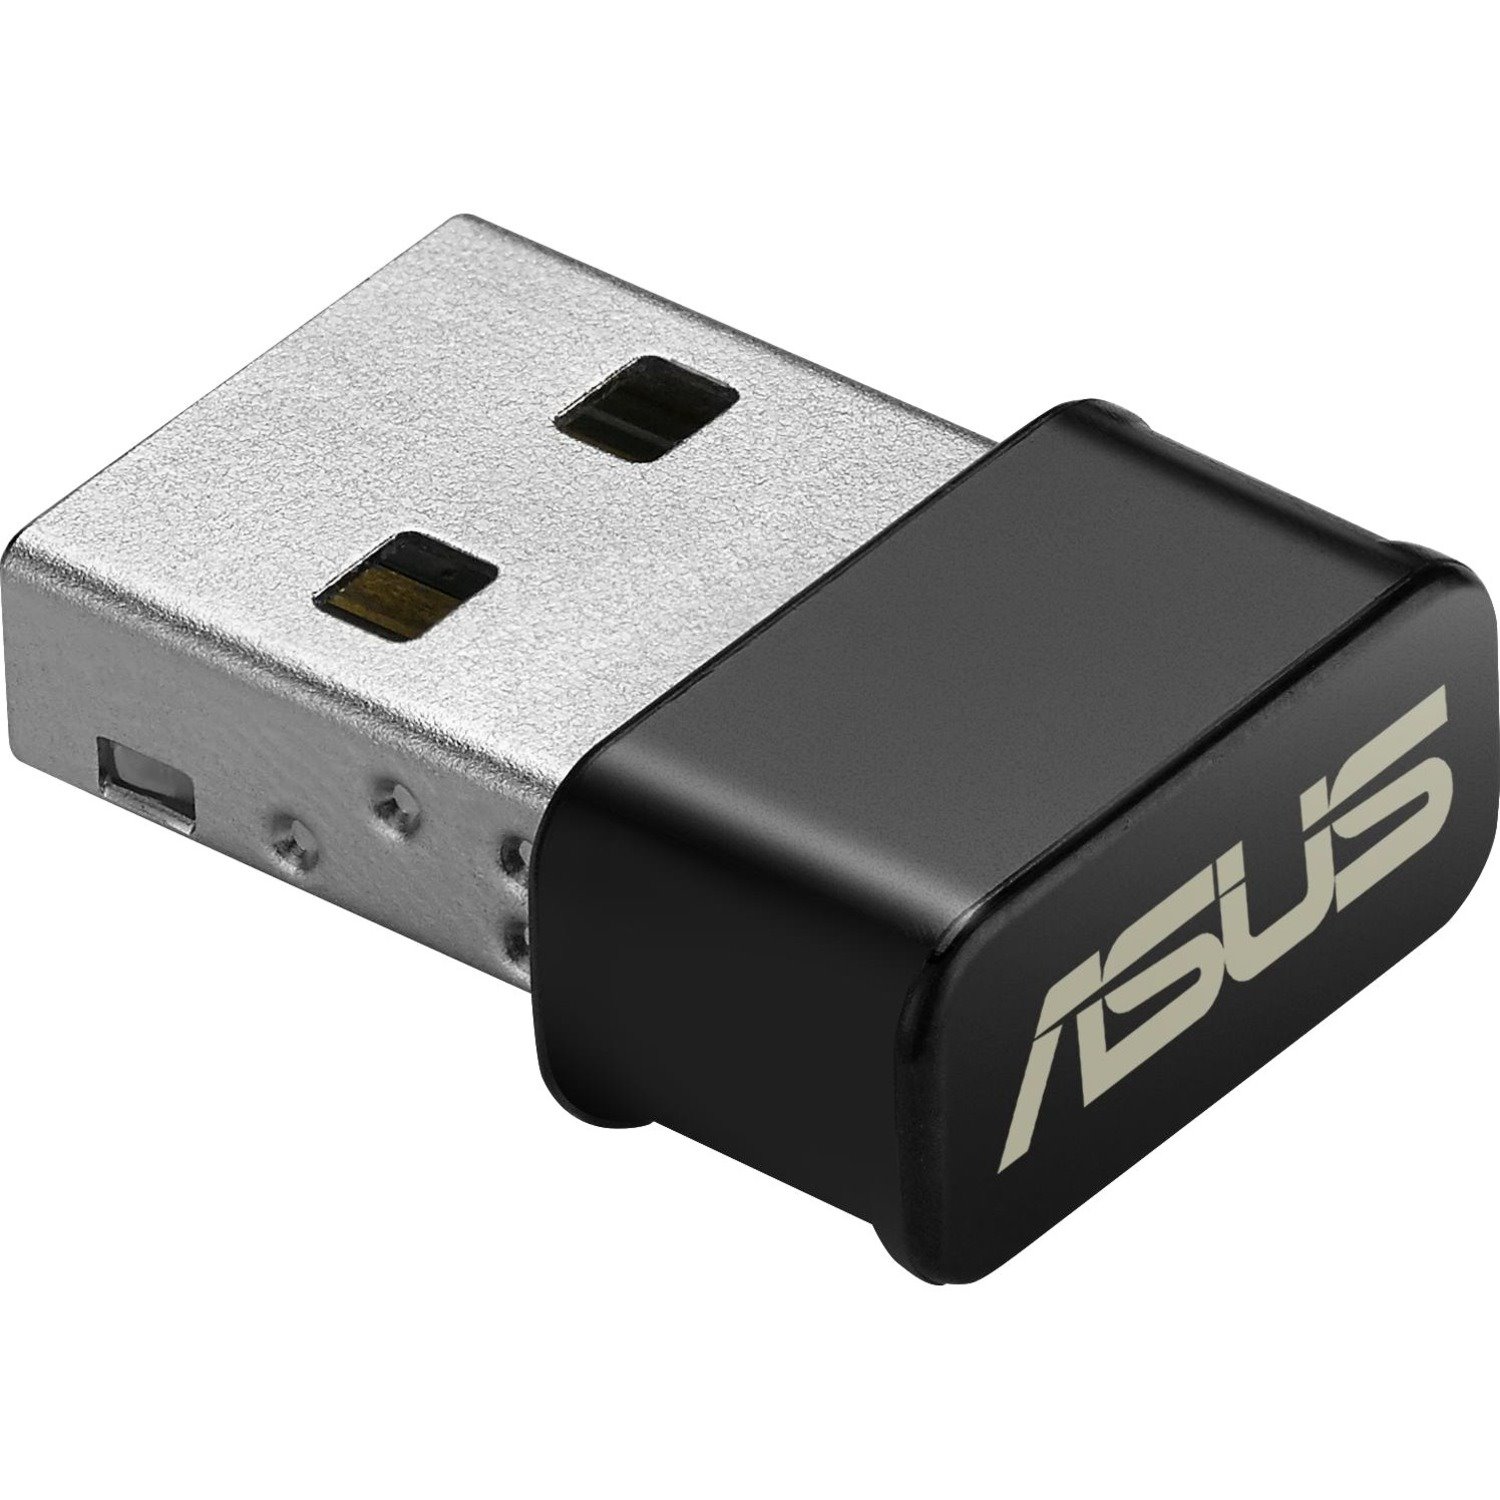 Asus USB-AC53 NANO IEEE 802.11ac Wi-Fi Adapter for Notebook